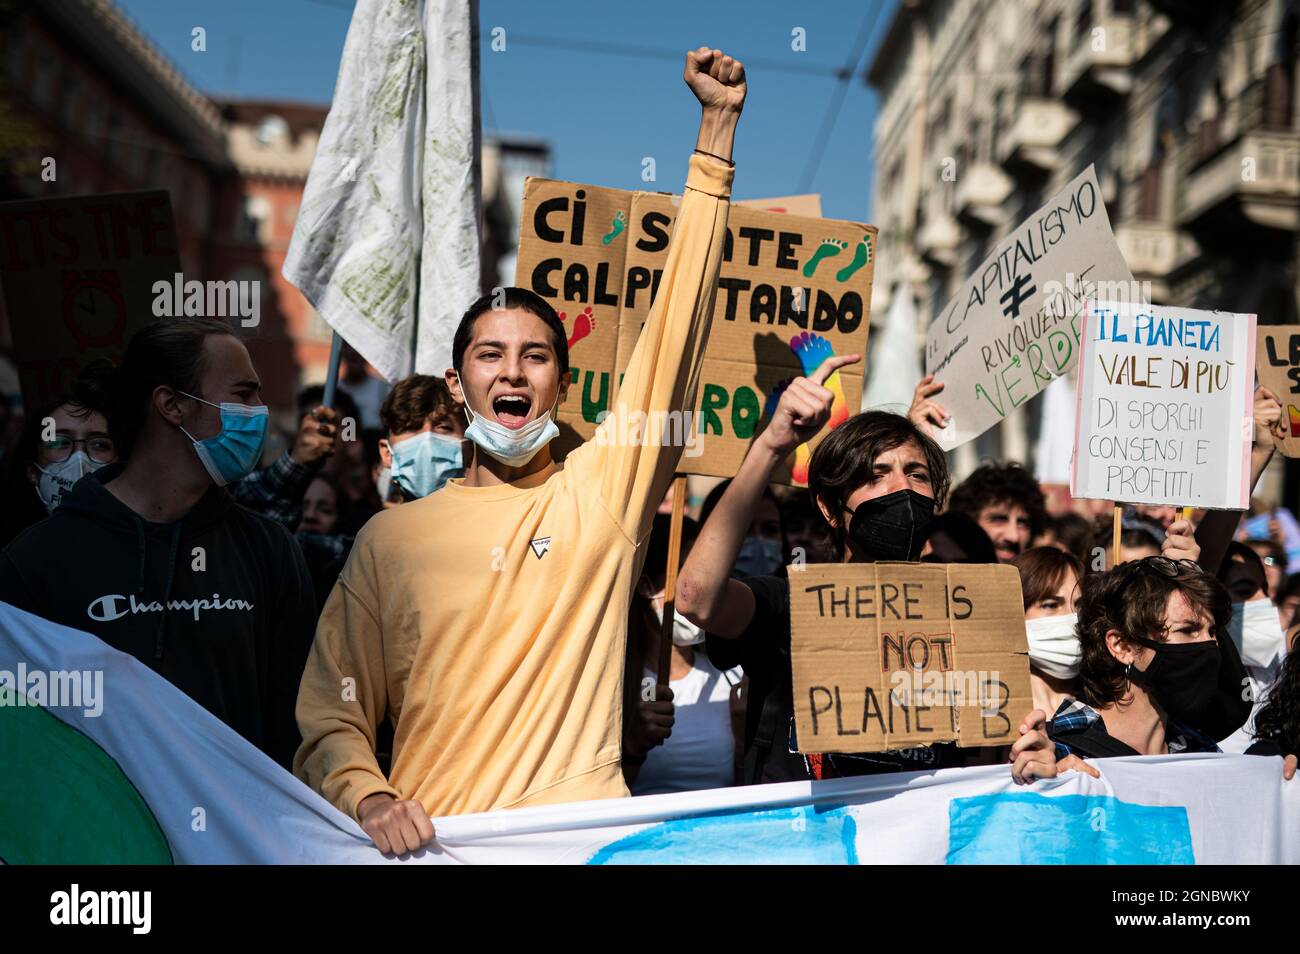 Turin, Italy. 24 September 2021. Climate activists gesture during 'Fridays for future' demonstration, a worldwide climate strike against governmental inaction towards climate breakdown and environmental pollution. Credit: Nicolò Campo/Alamy Live News Stock Photo